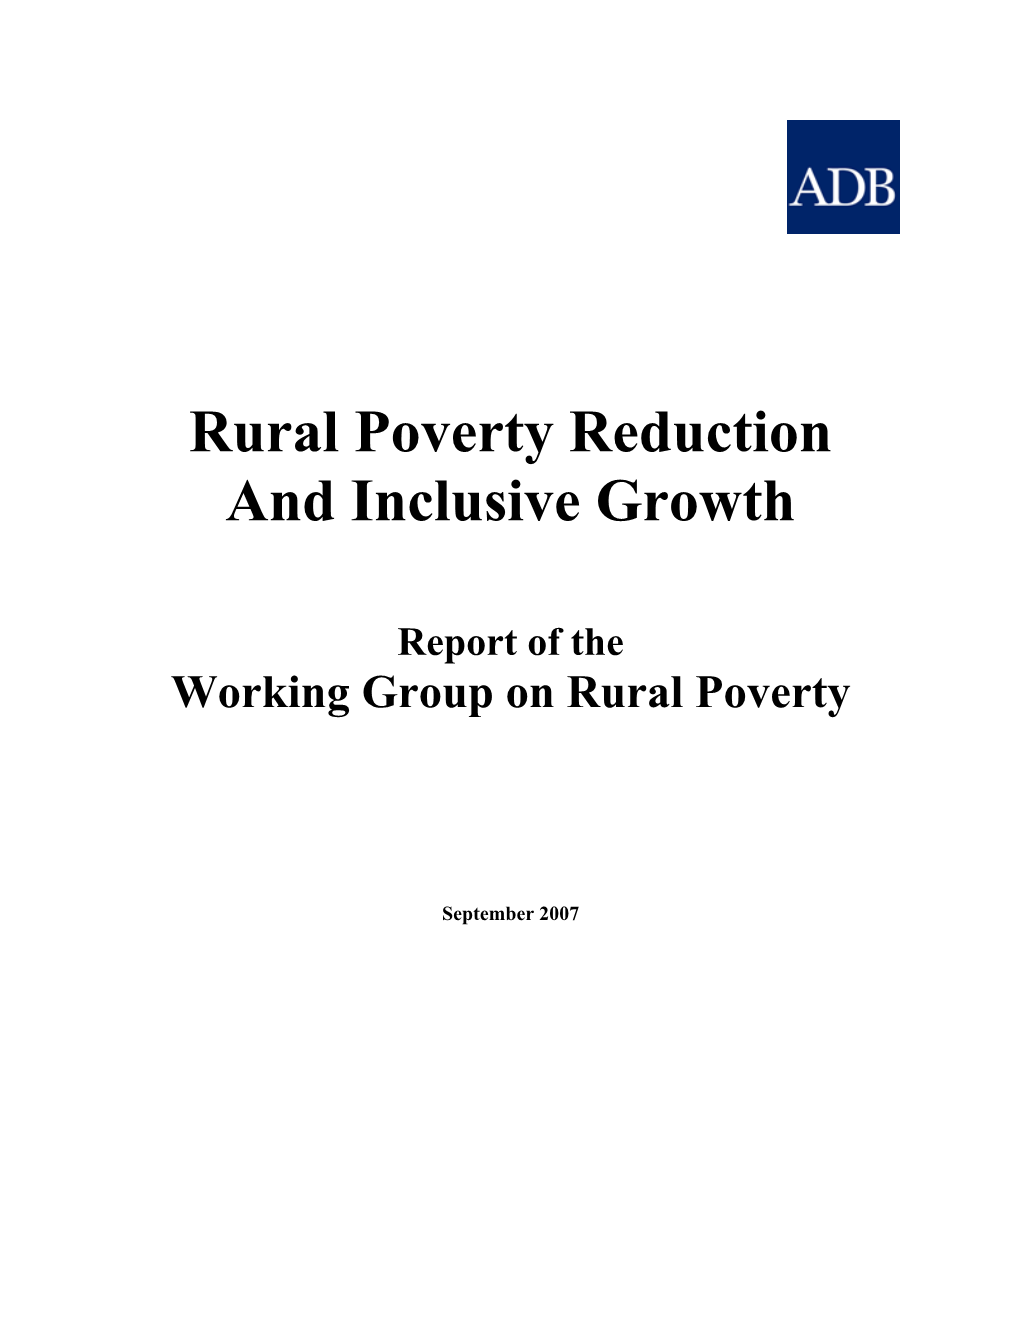 Rural Poverty Reduction and Inclusive Growth